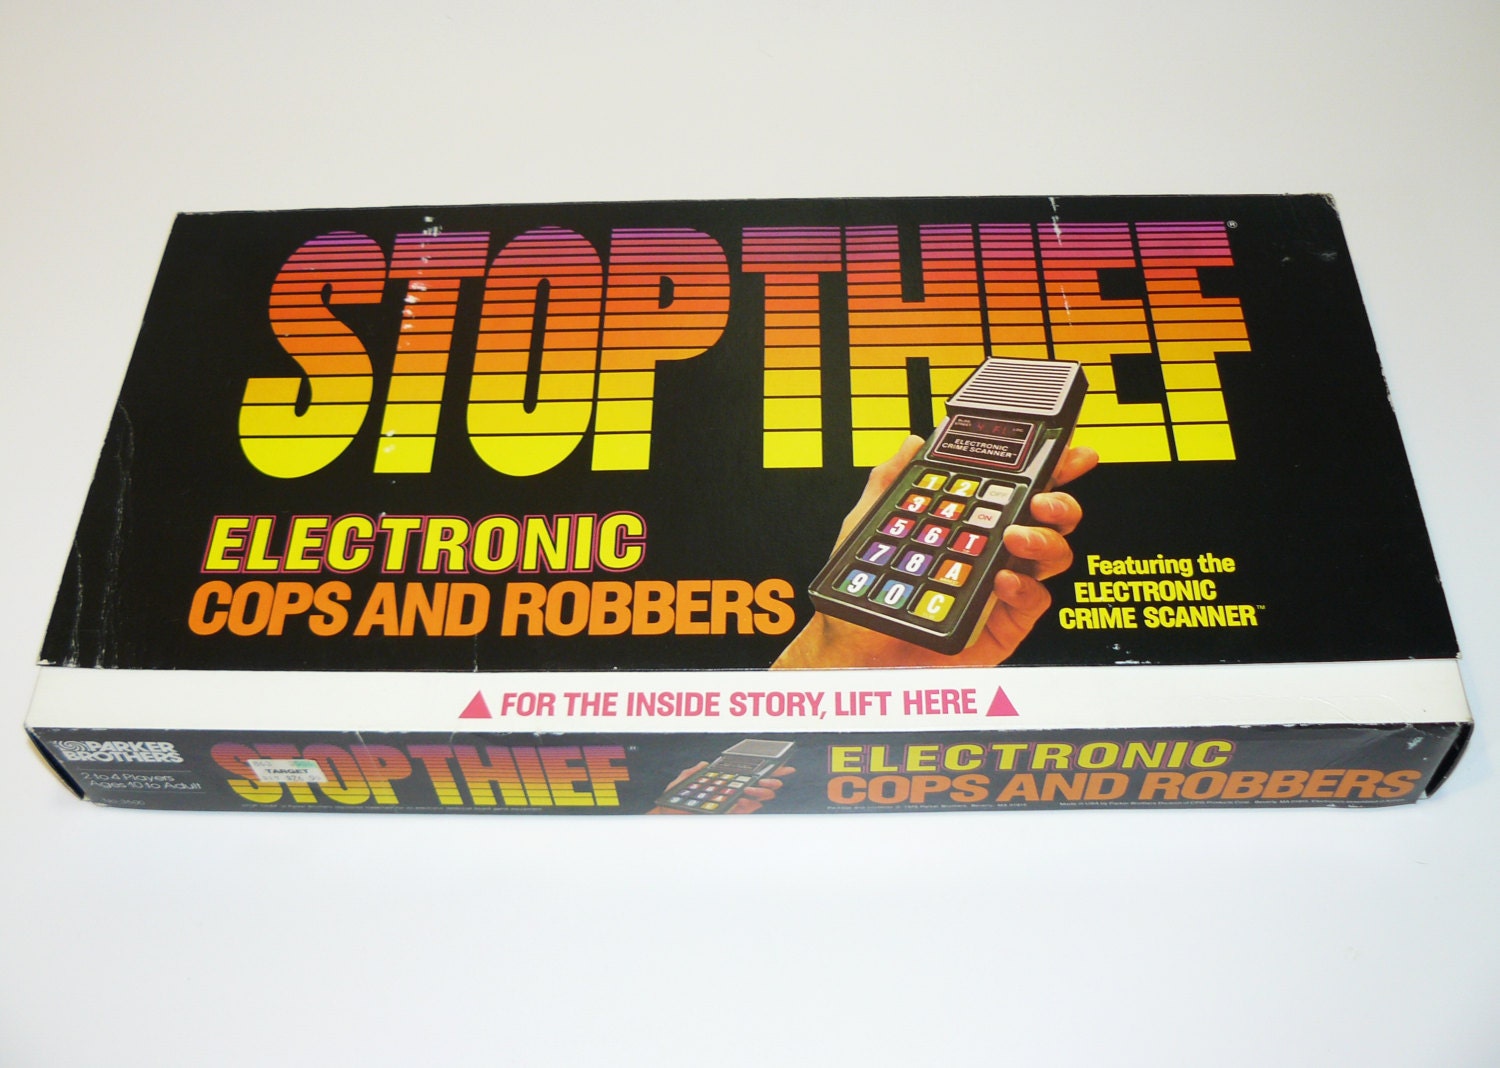 stop thief electronic cops and robbers